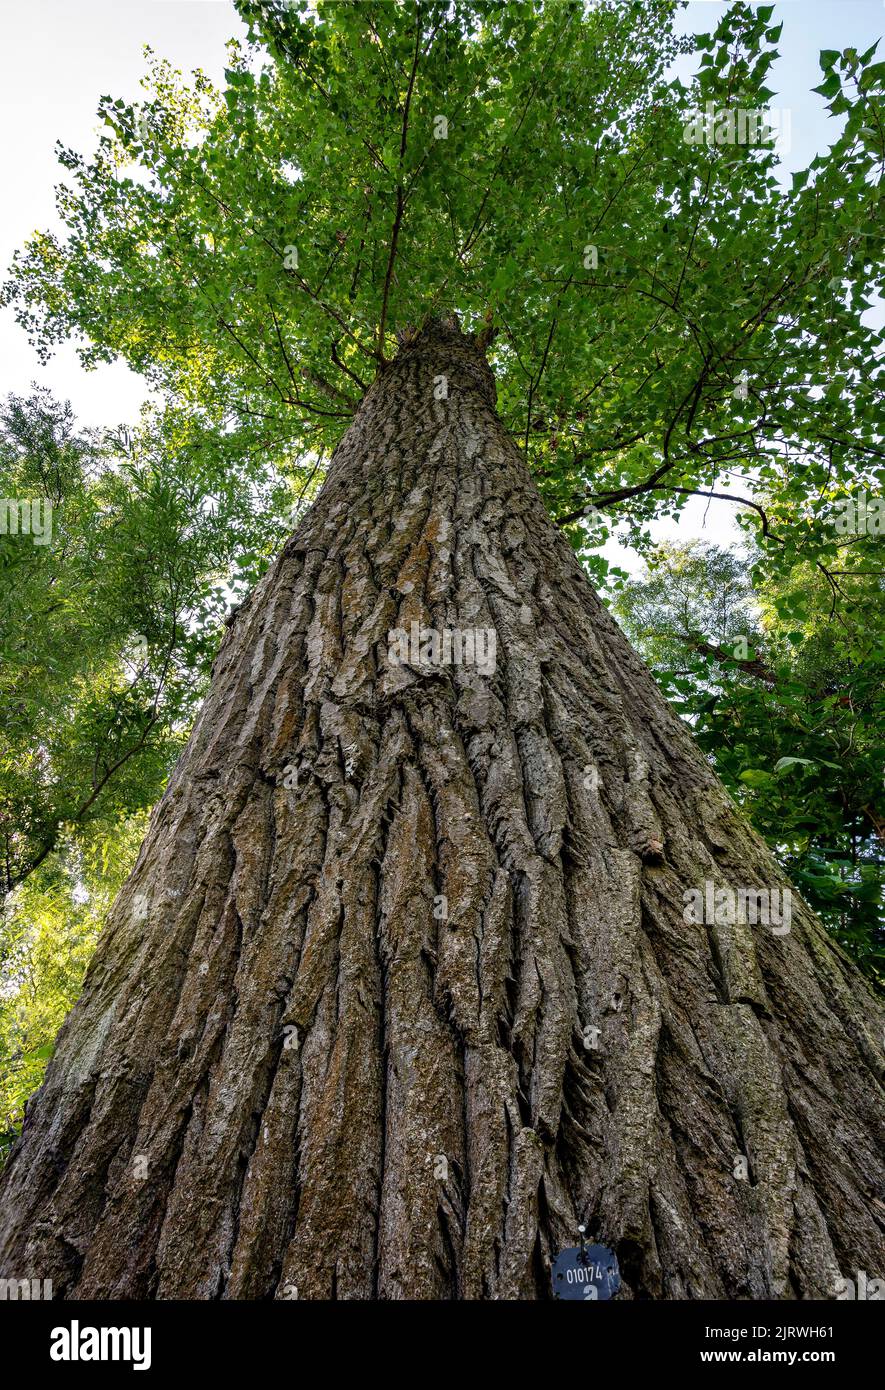 view along the trunk until the top of a mighty linden tree in the riparian forest of Tulln at the river Danube, Austria Stock Photo